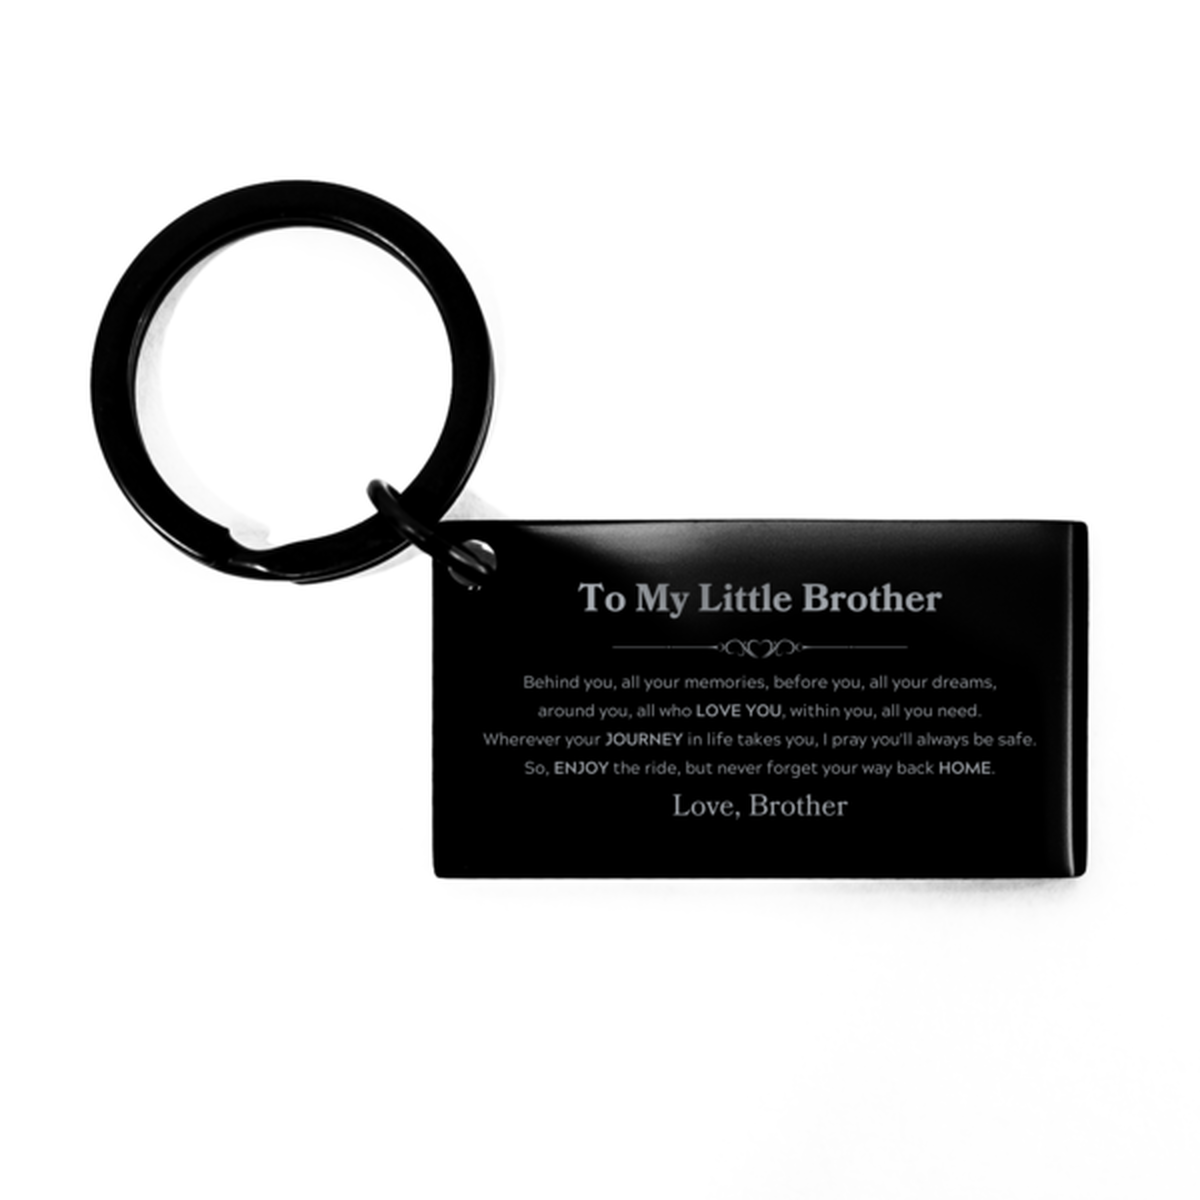 To My Little Brother Graduation Gifts from Brother, Little Brother Keychain Christmas Birthday Gifts for Little Brother Behind you, all your memories, before you, all your dreams. Love, Brother